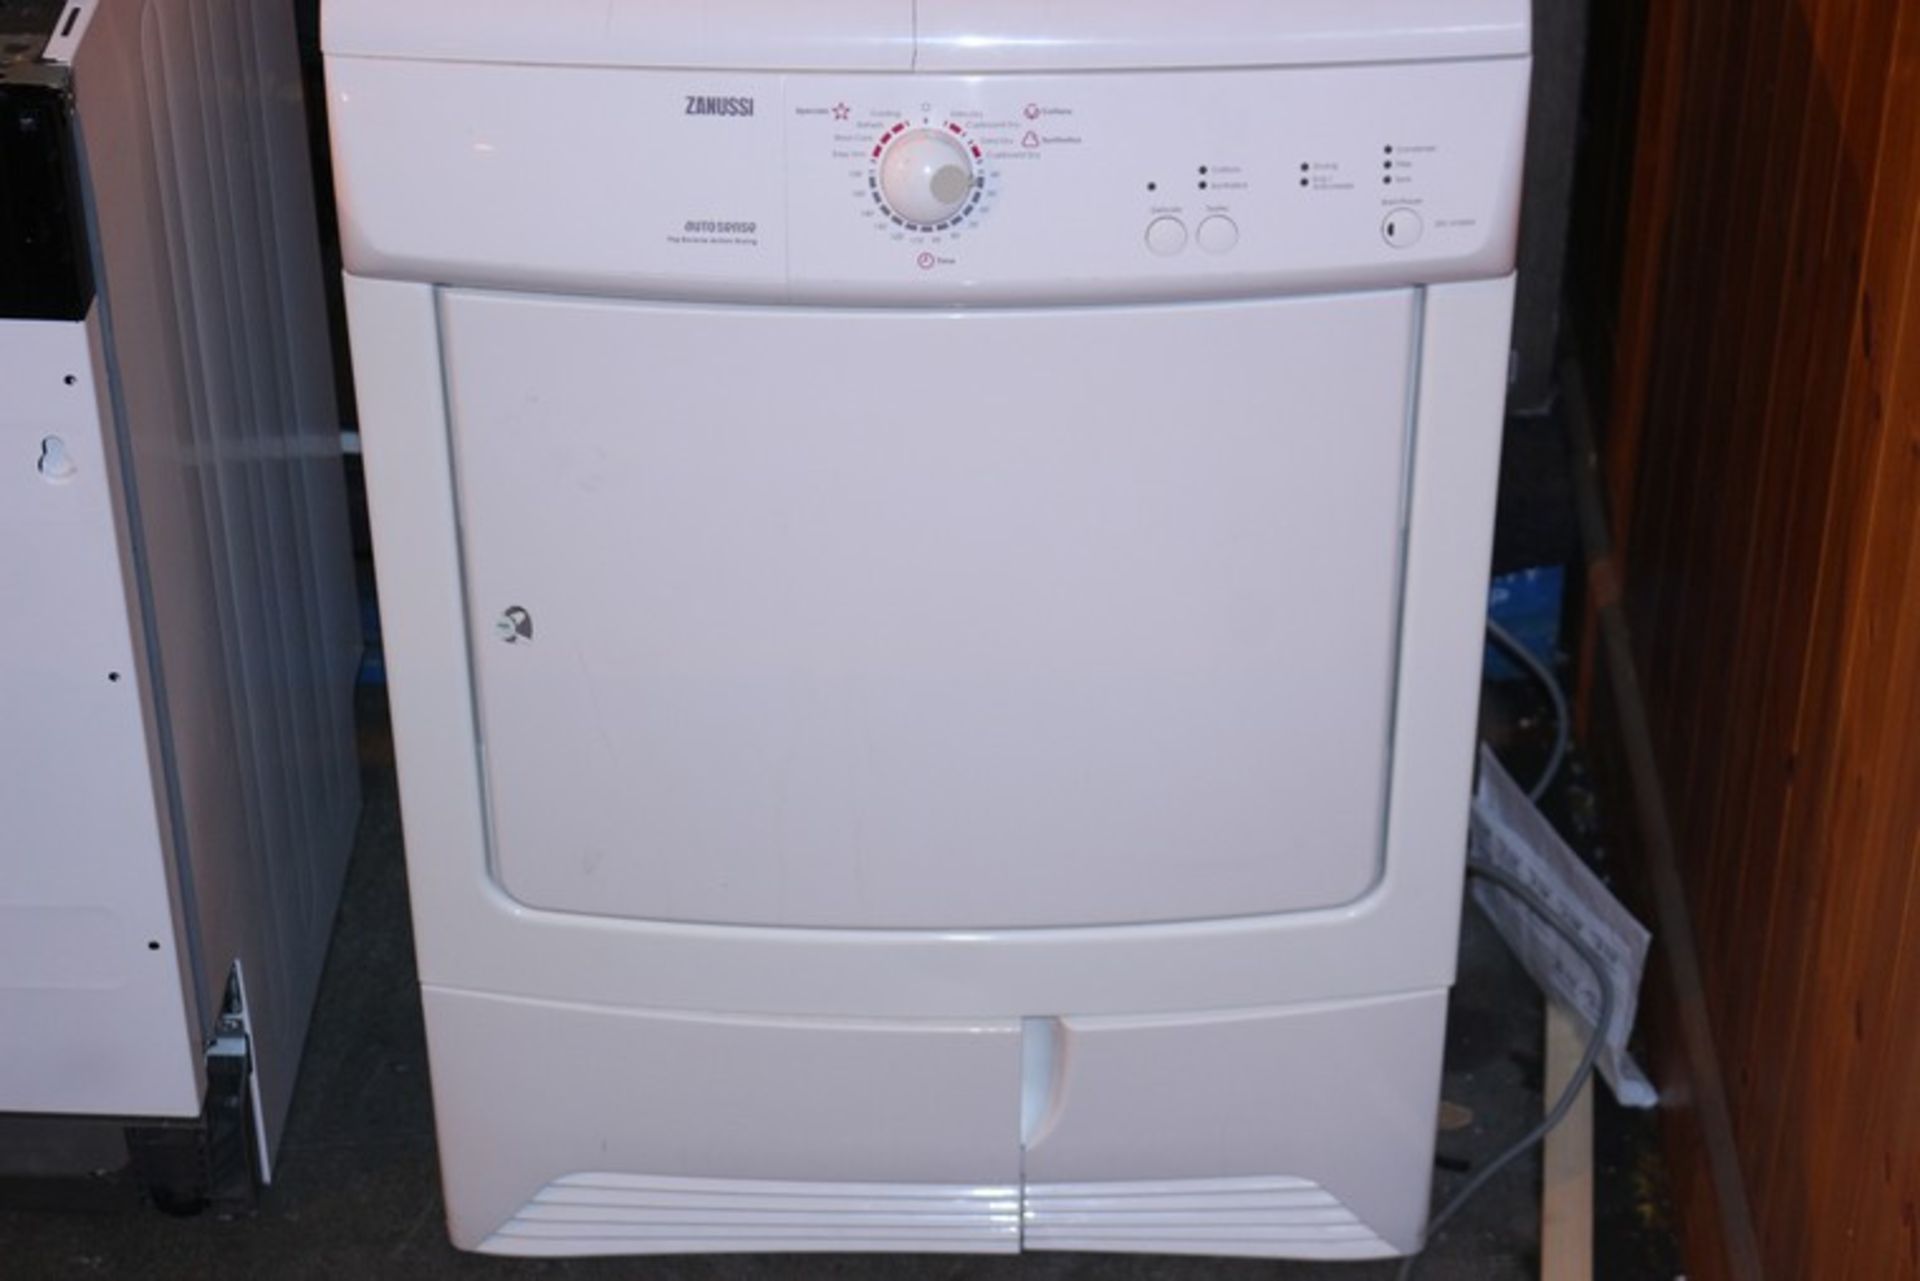 1 x ZANUSSI ZDC47200W DRYER IN WHITE (18.10.17) *PLEASE NOTE THAT THE BID PRICE IS MULTIPLIED BY THE